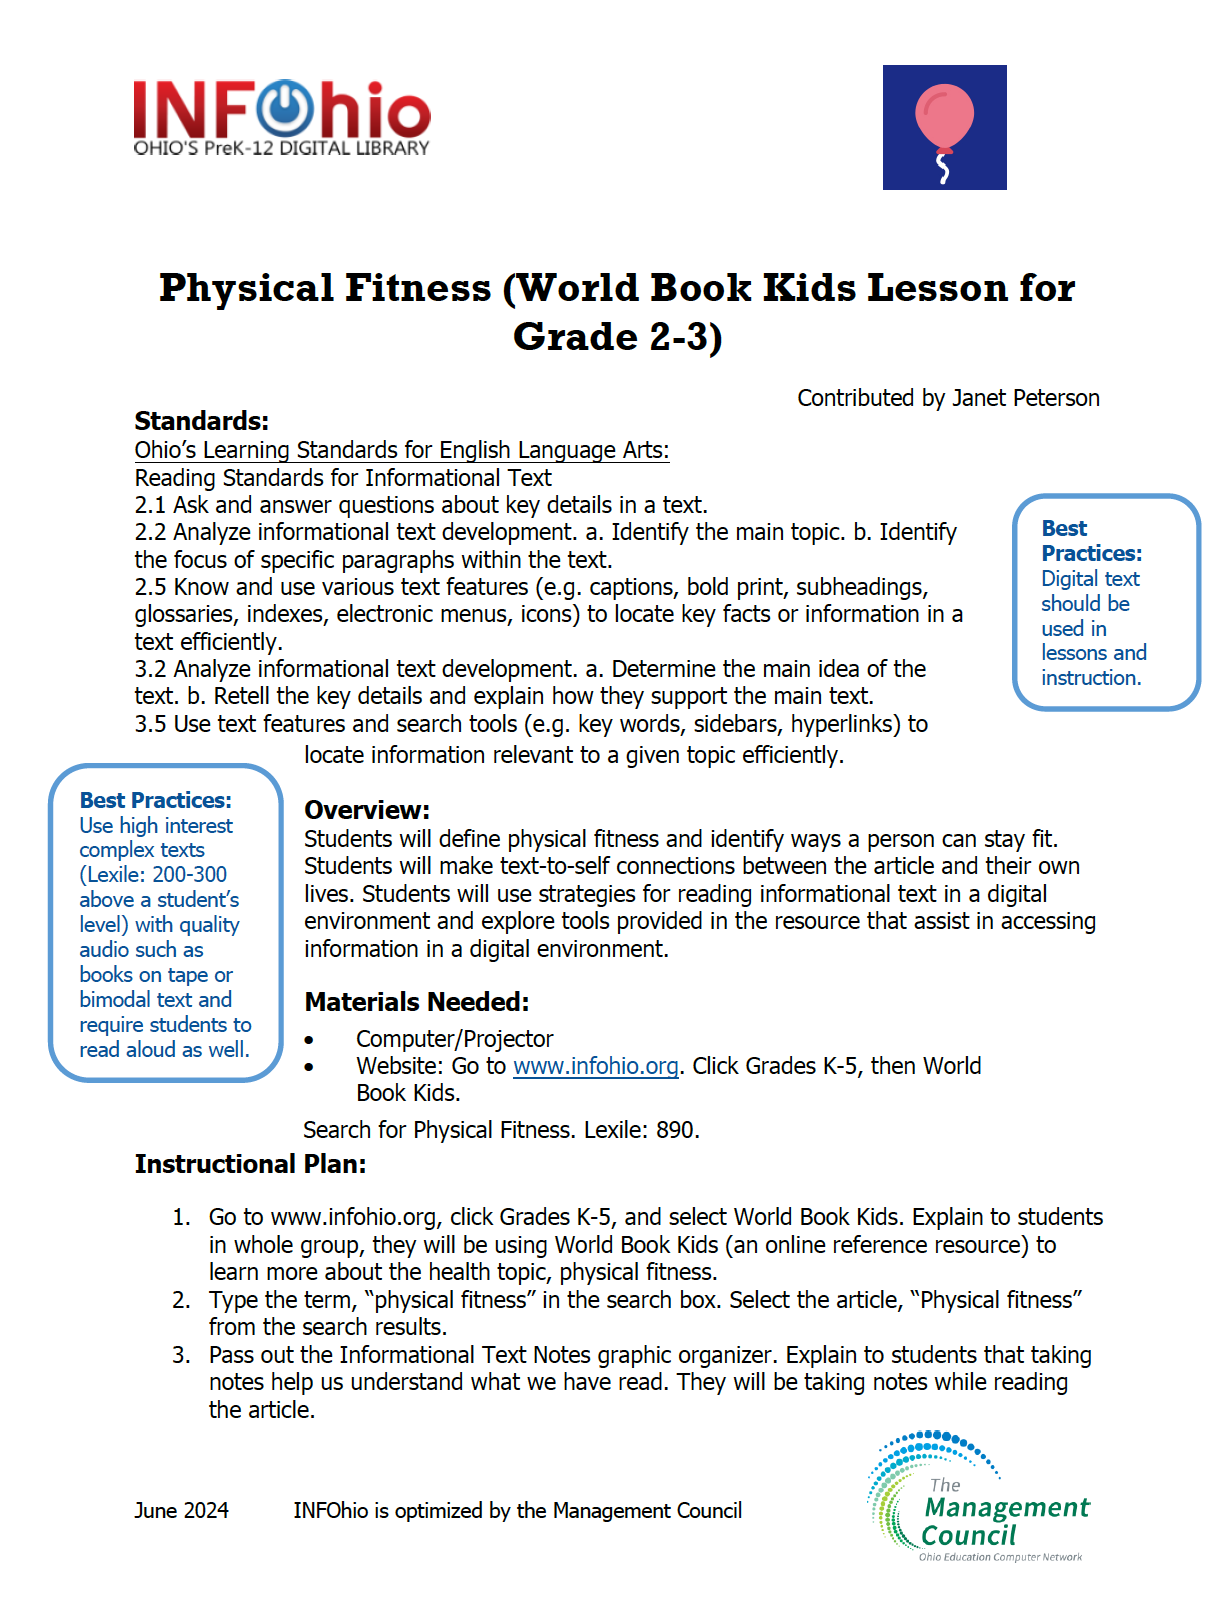 Physical Fitness (World Book Kids Lesson for Grade 2-3)